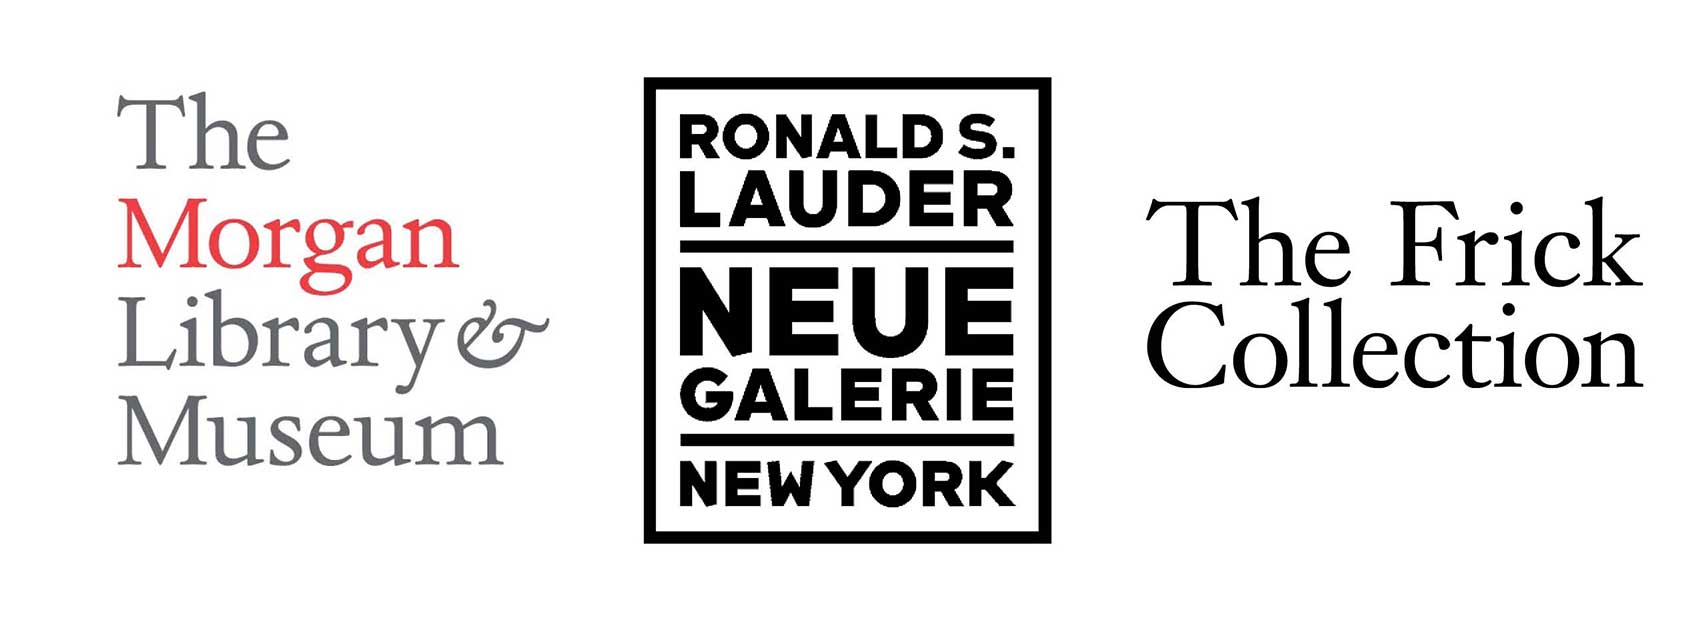 three logos reading The Morgan Library & Museum, Ronald S. Lauder Neue Galerie New York, The Frick Collection